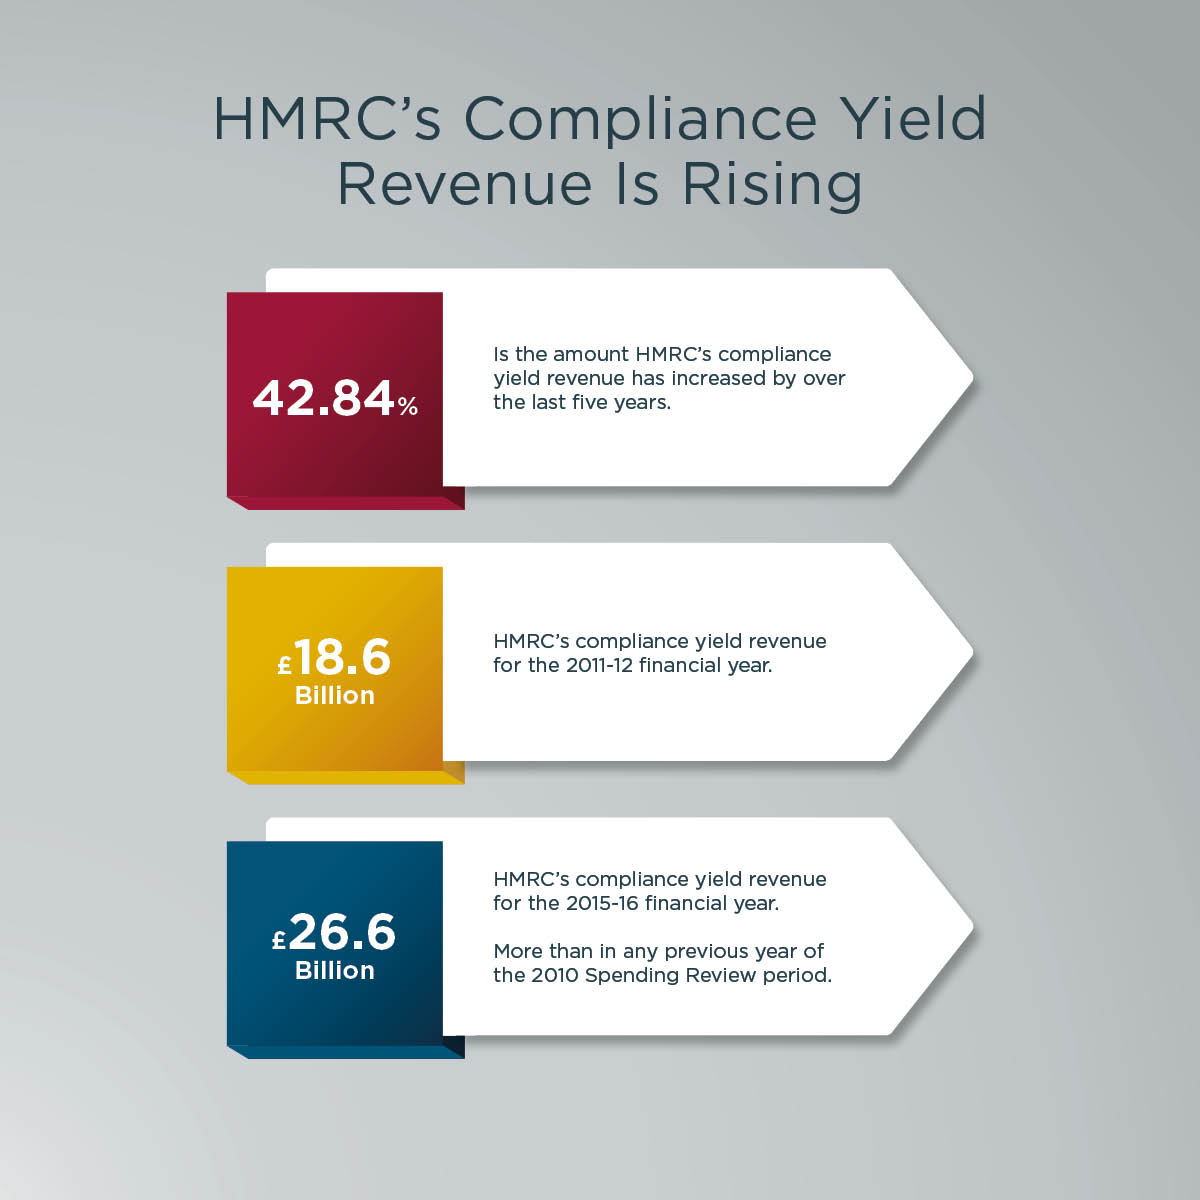 https://www.tindles.co.uk/wp-content/uploads/2017/06/2017-06-01-HMRCs-compliance-yield-is-rising.jpg